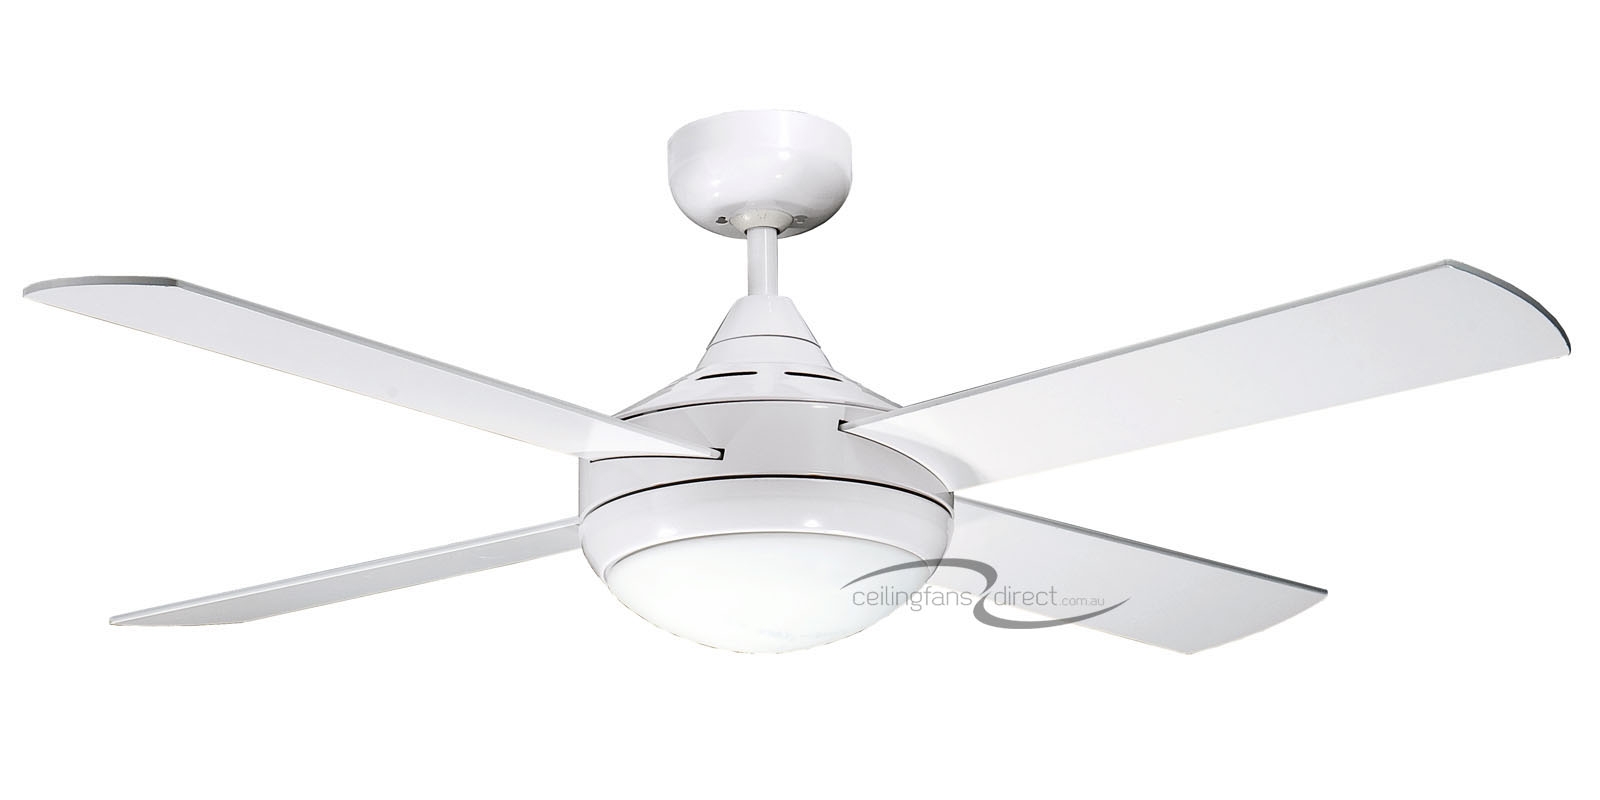 30 Outdoor Ceiling Fan With Light1600 X 800